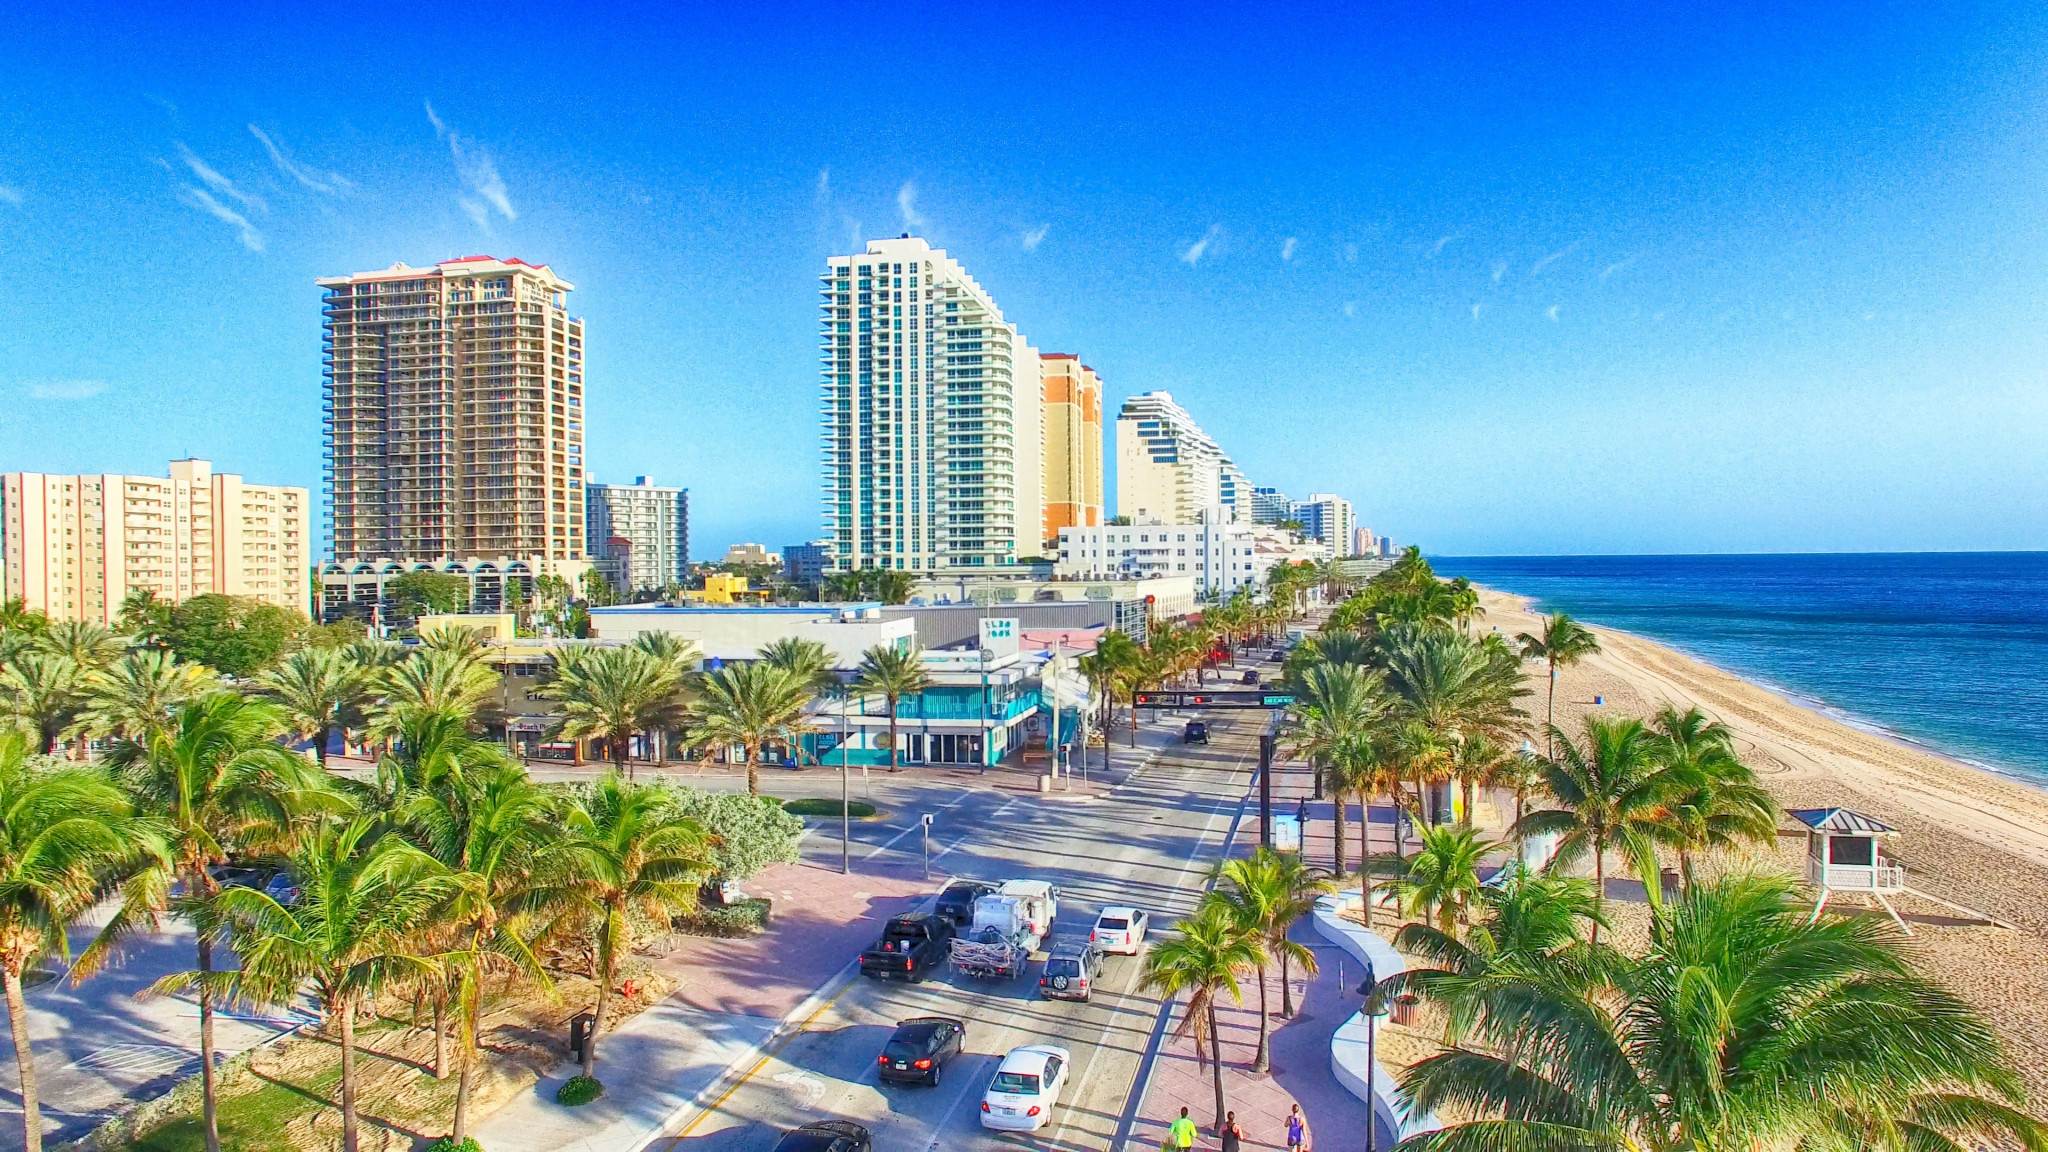 Fort Lauderdale to host first Regional SportAccord Pan America in 2019